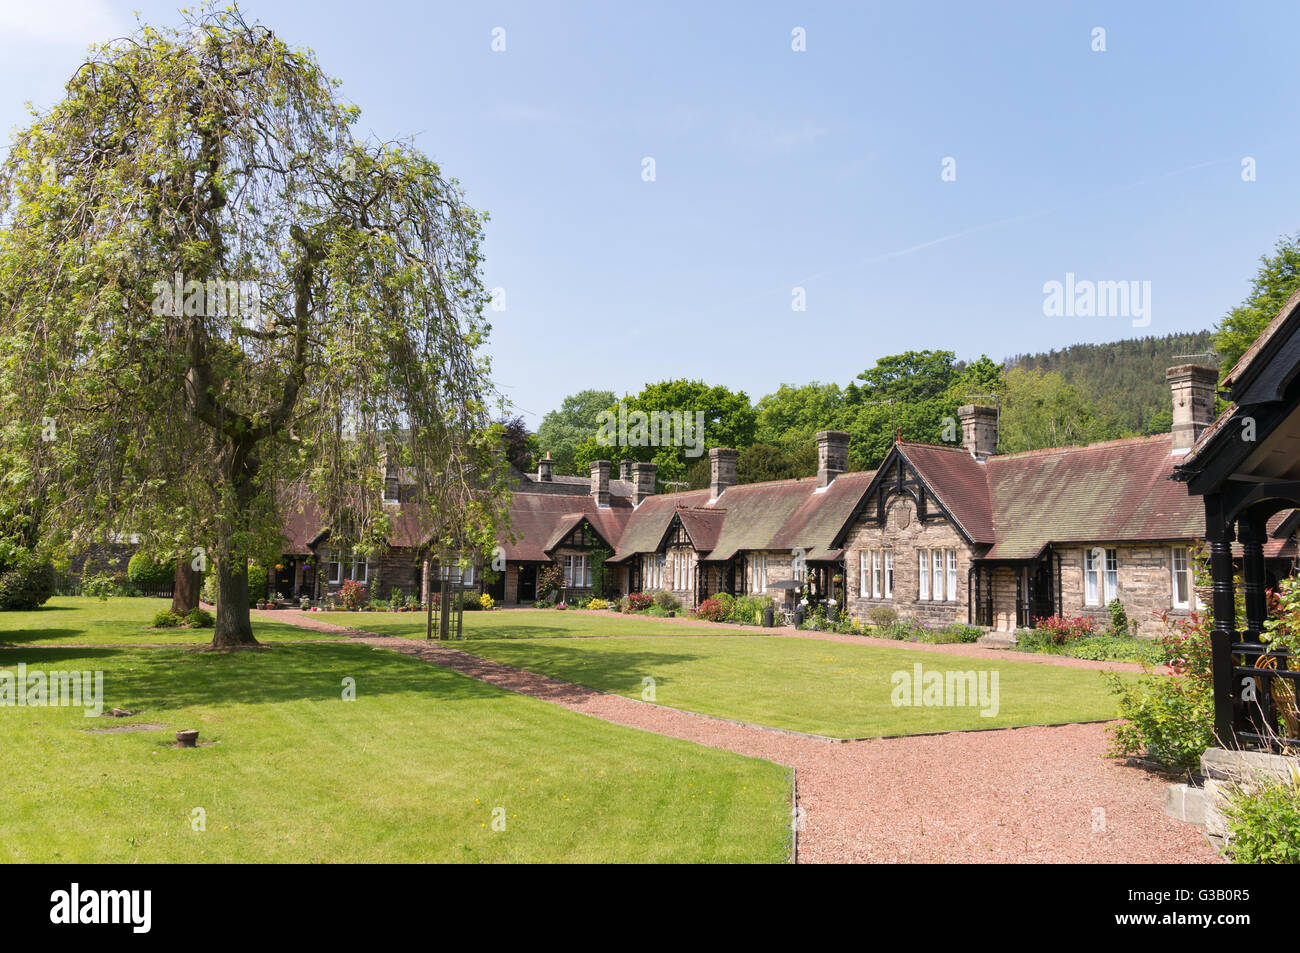 Armstrong cottages, Victorian almshouses, Rothbury, Northumberland, England, UK Stock Photo